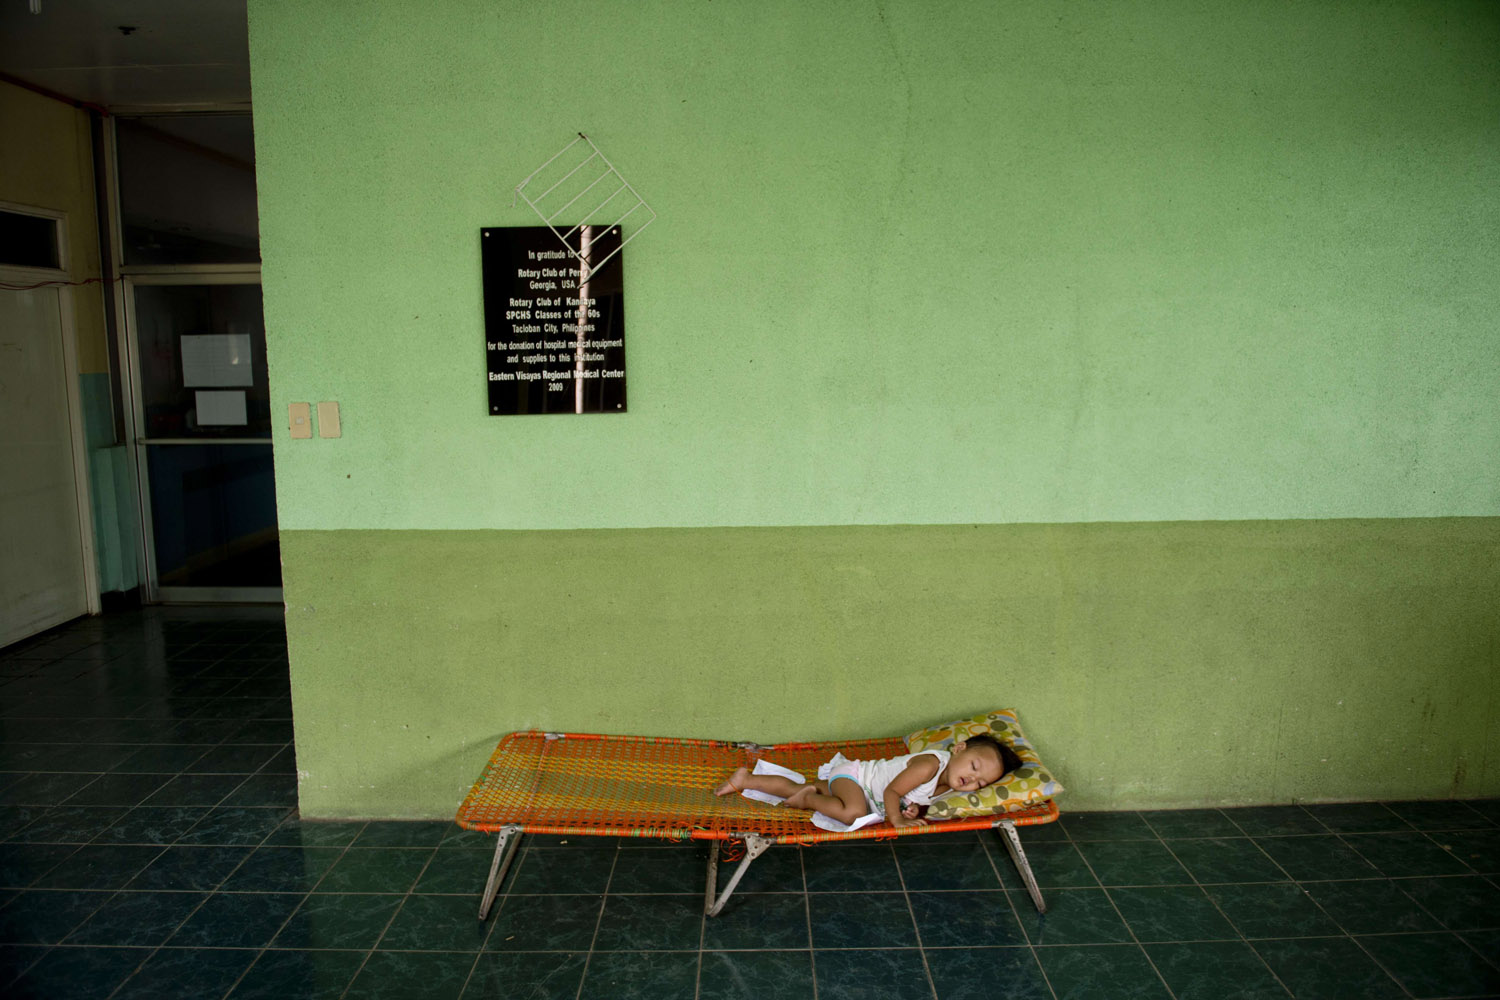 Nov. 20, 2013. A child sleeps on a camping bed outside the overcrowded children's and maternity ward at the Eastern Visayas Medical Center in Tacloban, Philippines.